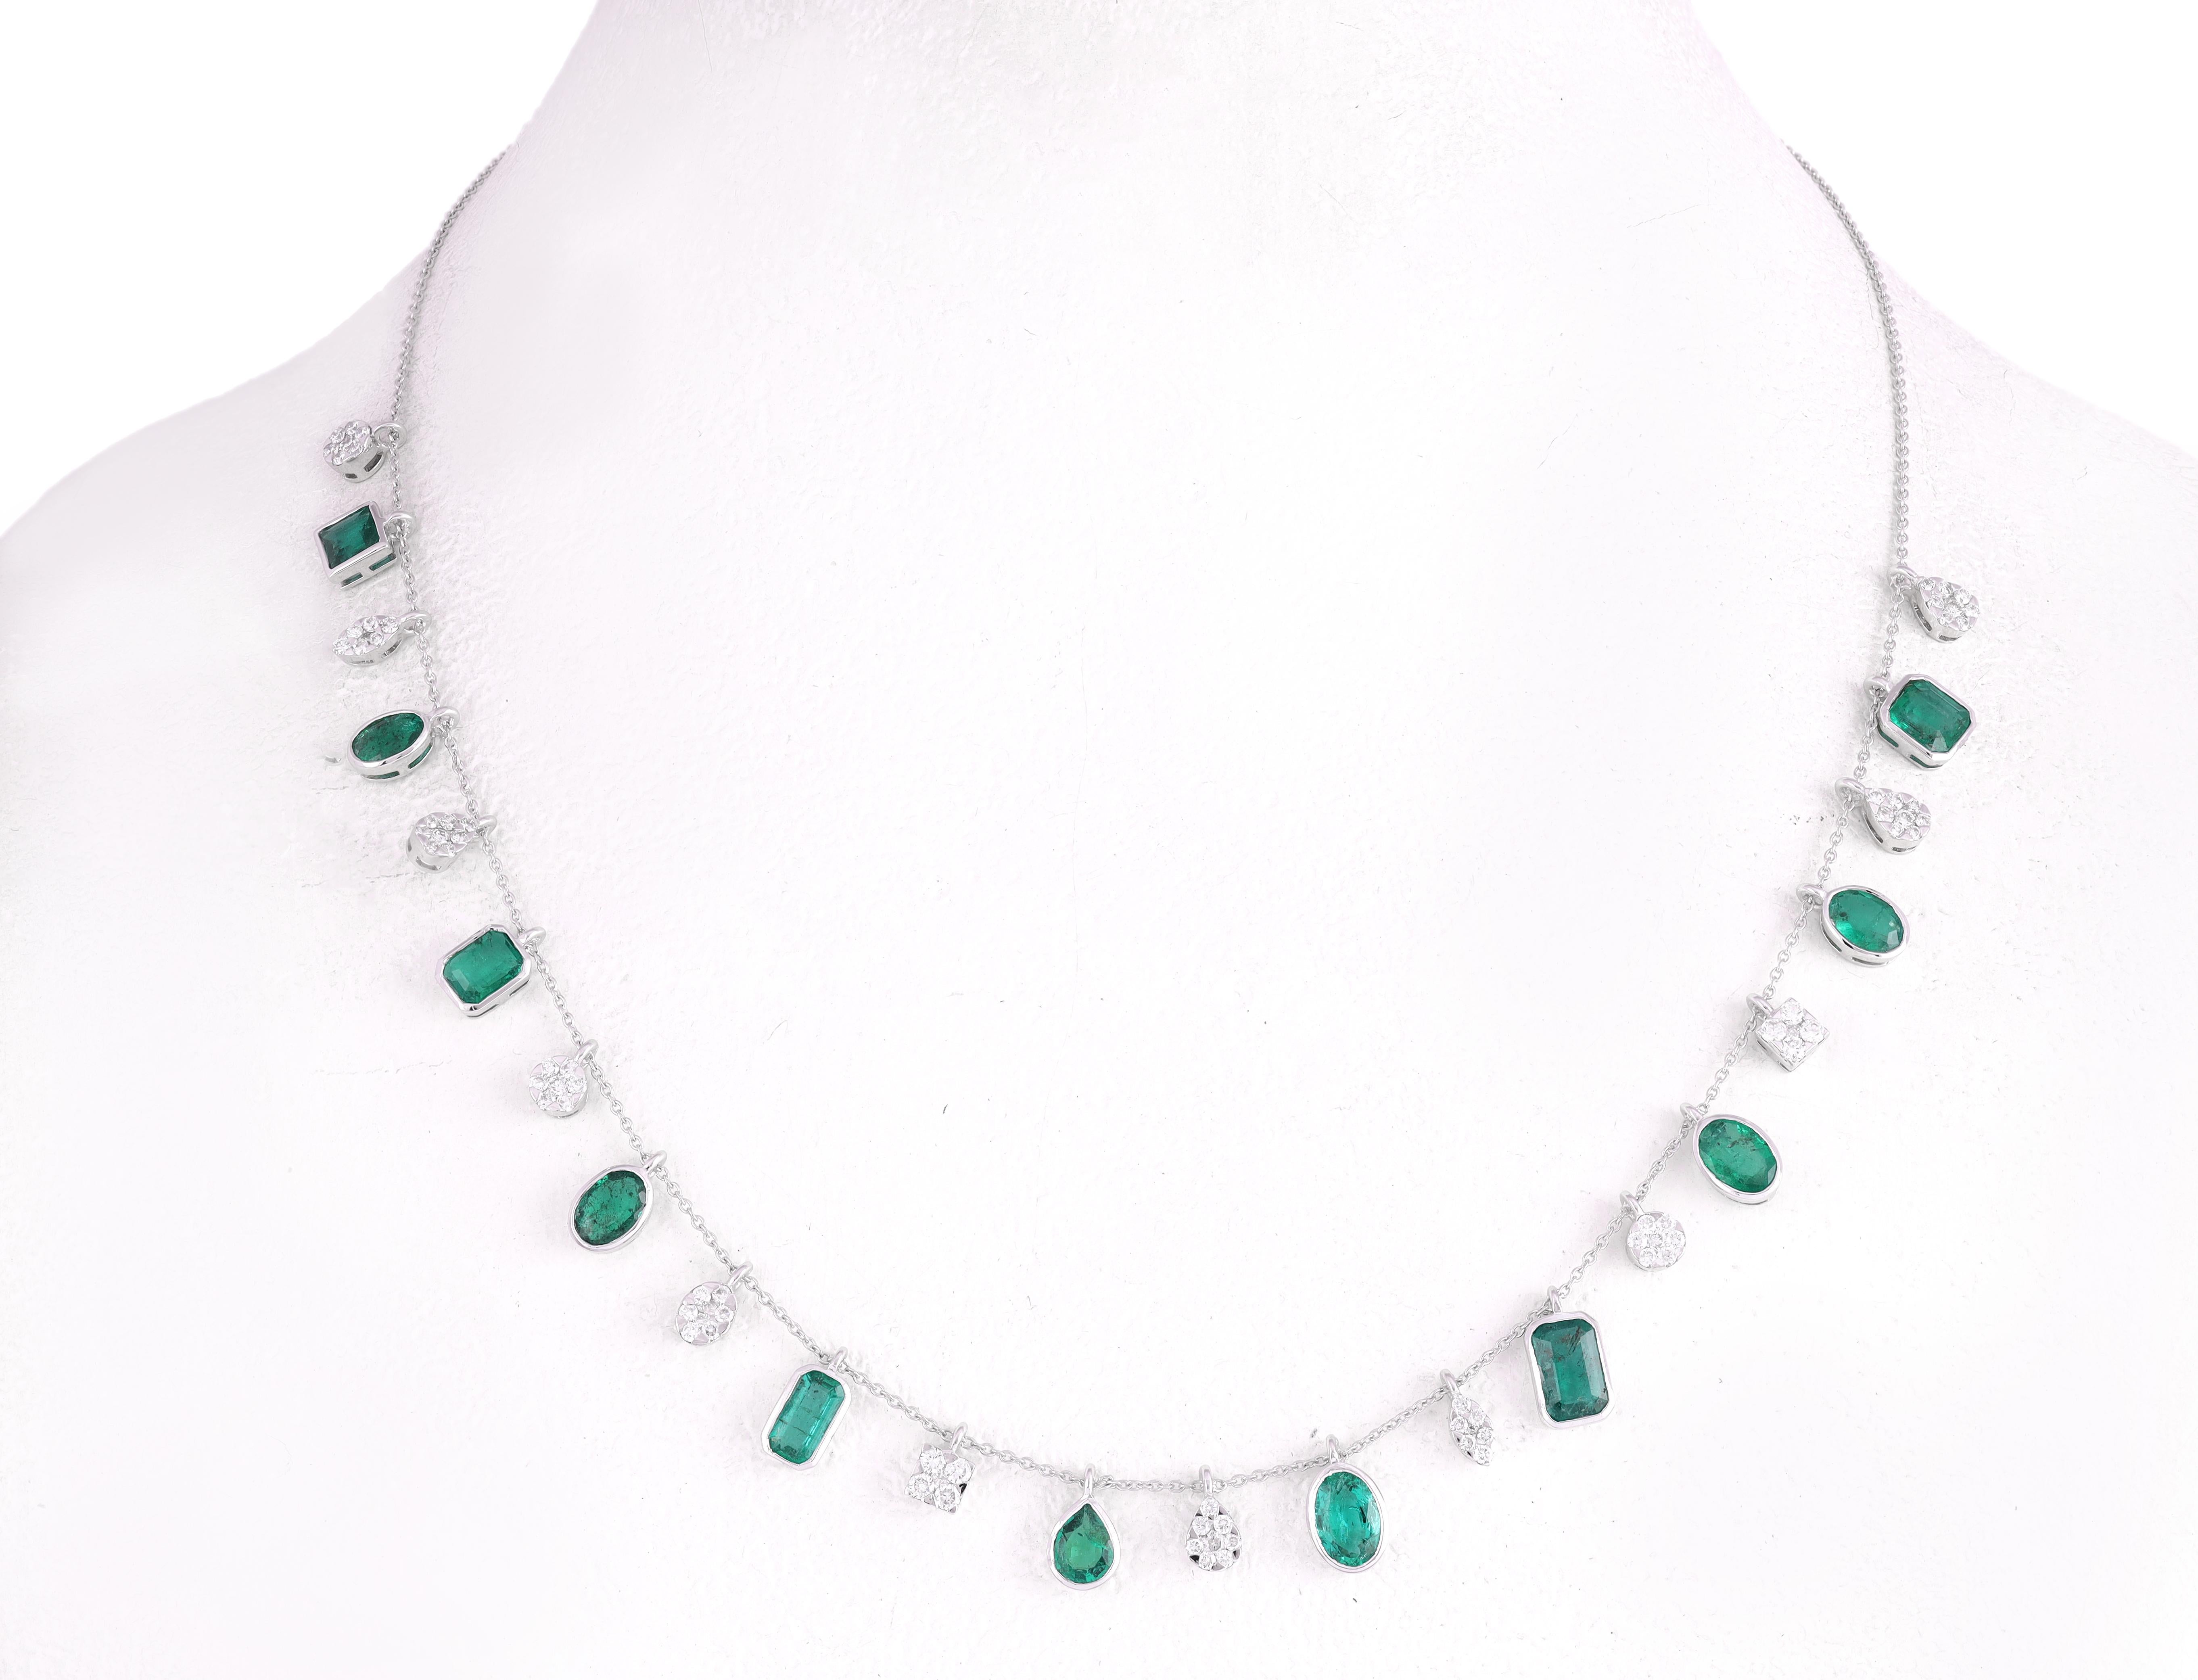 Modernist  7.34 Carat Emerald & Diamond Chain Necklace in 18k White Gold For Sale